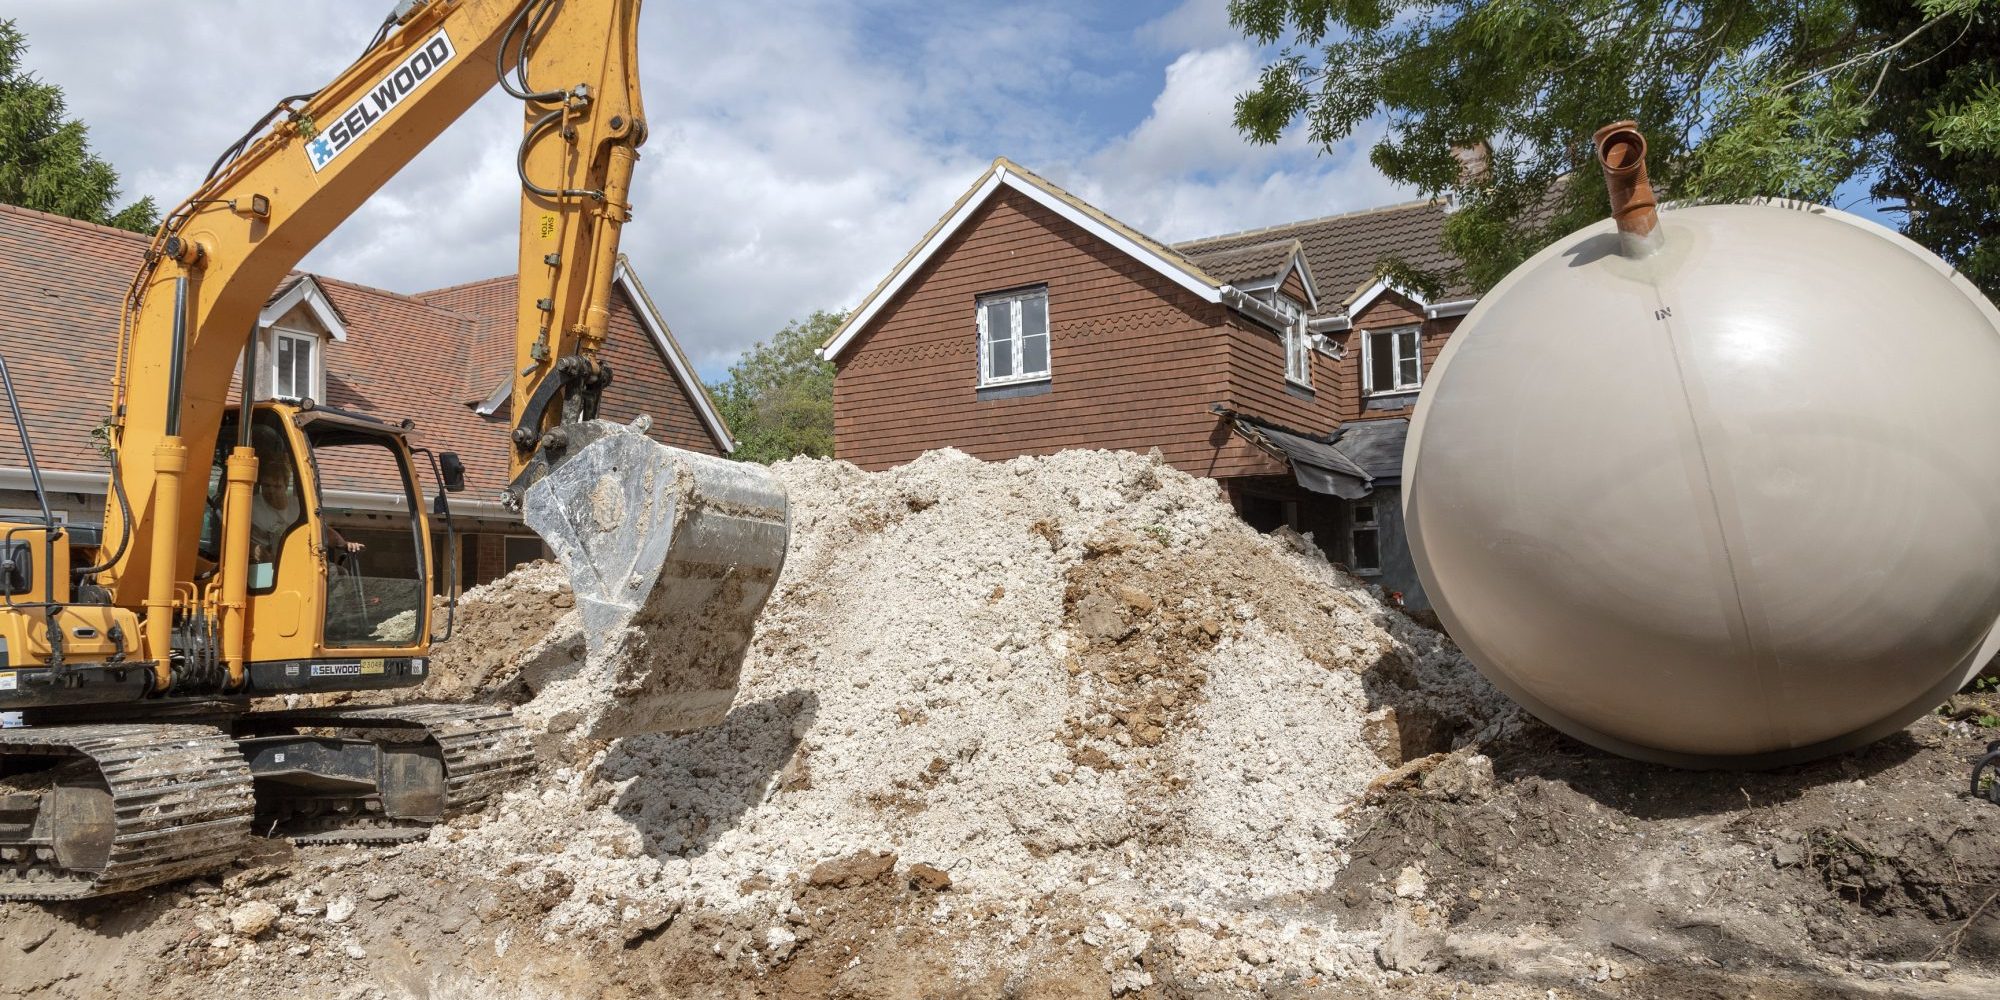 , the team combines first-rate workmanship with efficiency to provide the best services on the market. From foundations to drainage, sewers to kerbs, our team is able to go above and beyond to ensure our clients come away happy with our work. Get in touch today to find out how we can help you the groundwork on your next project.